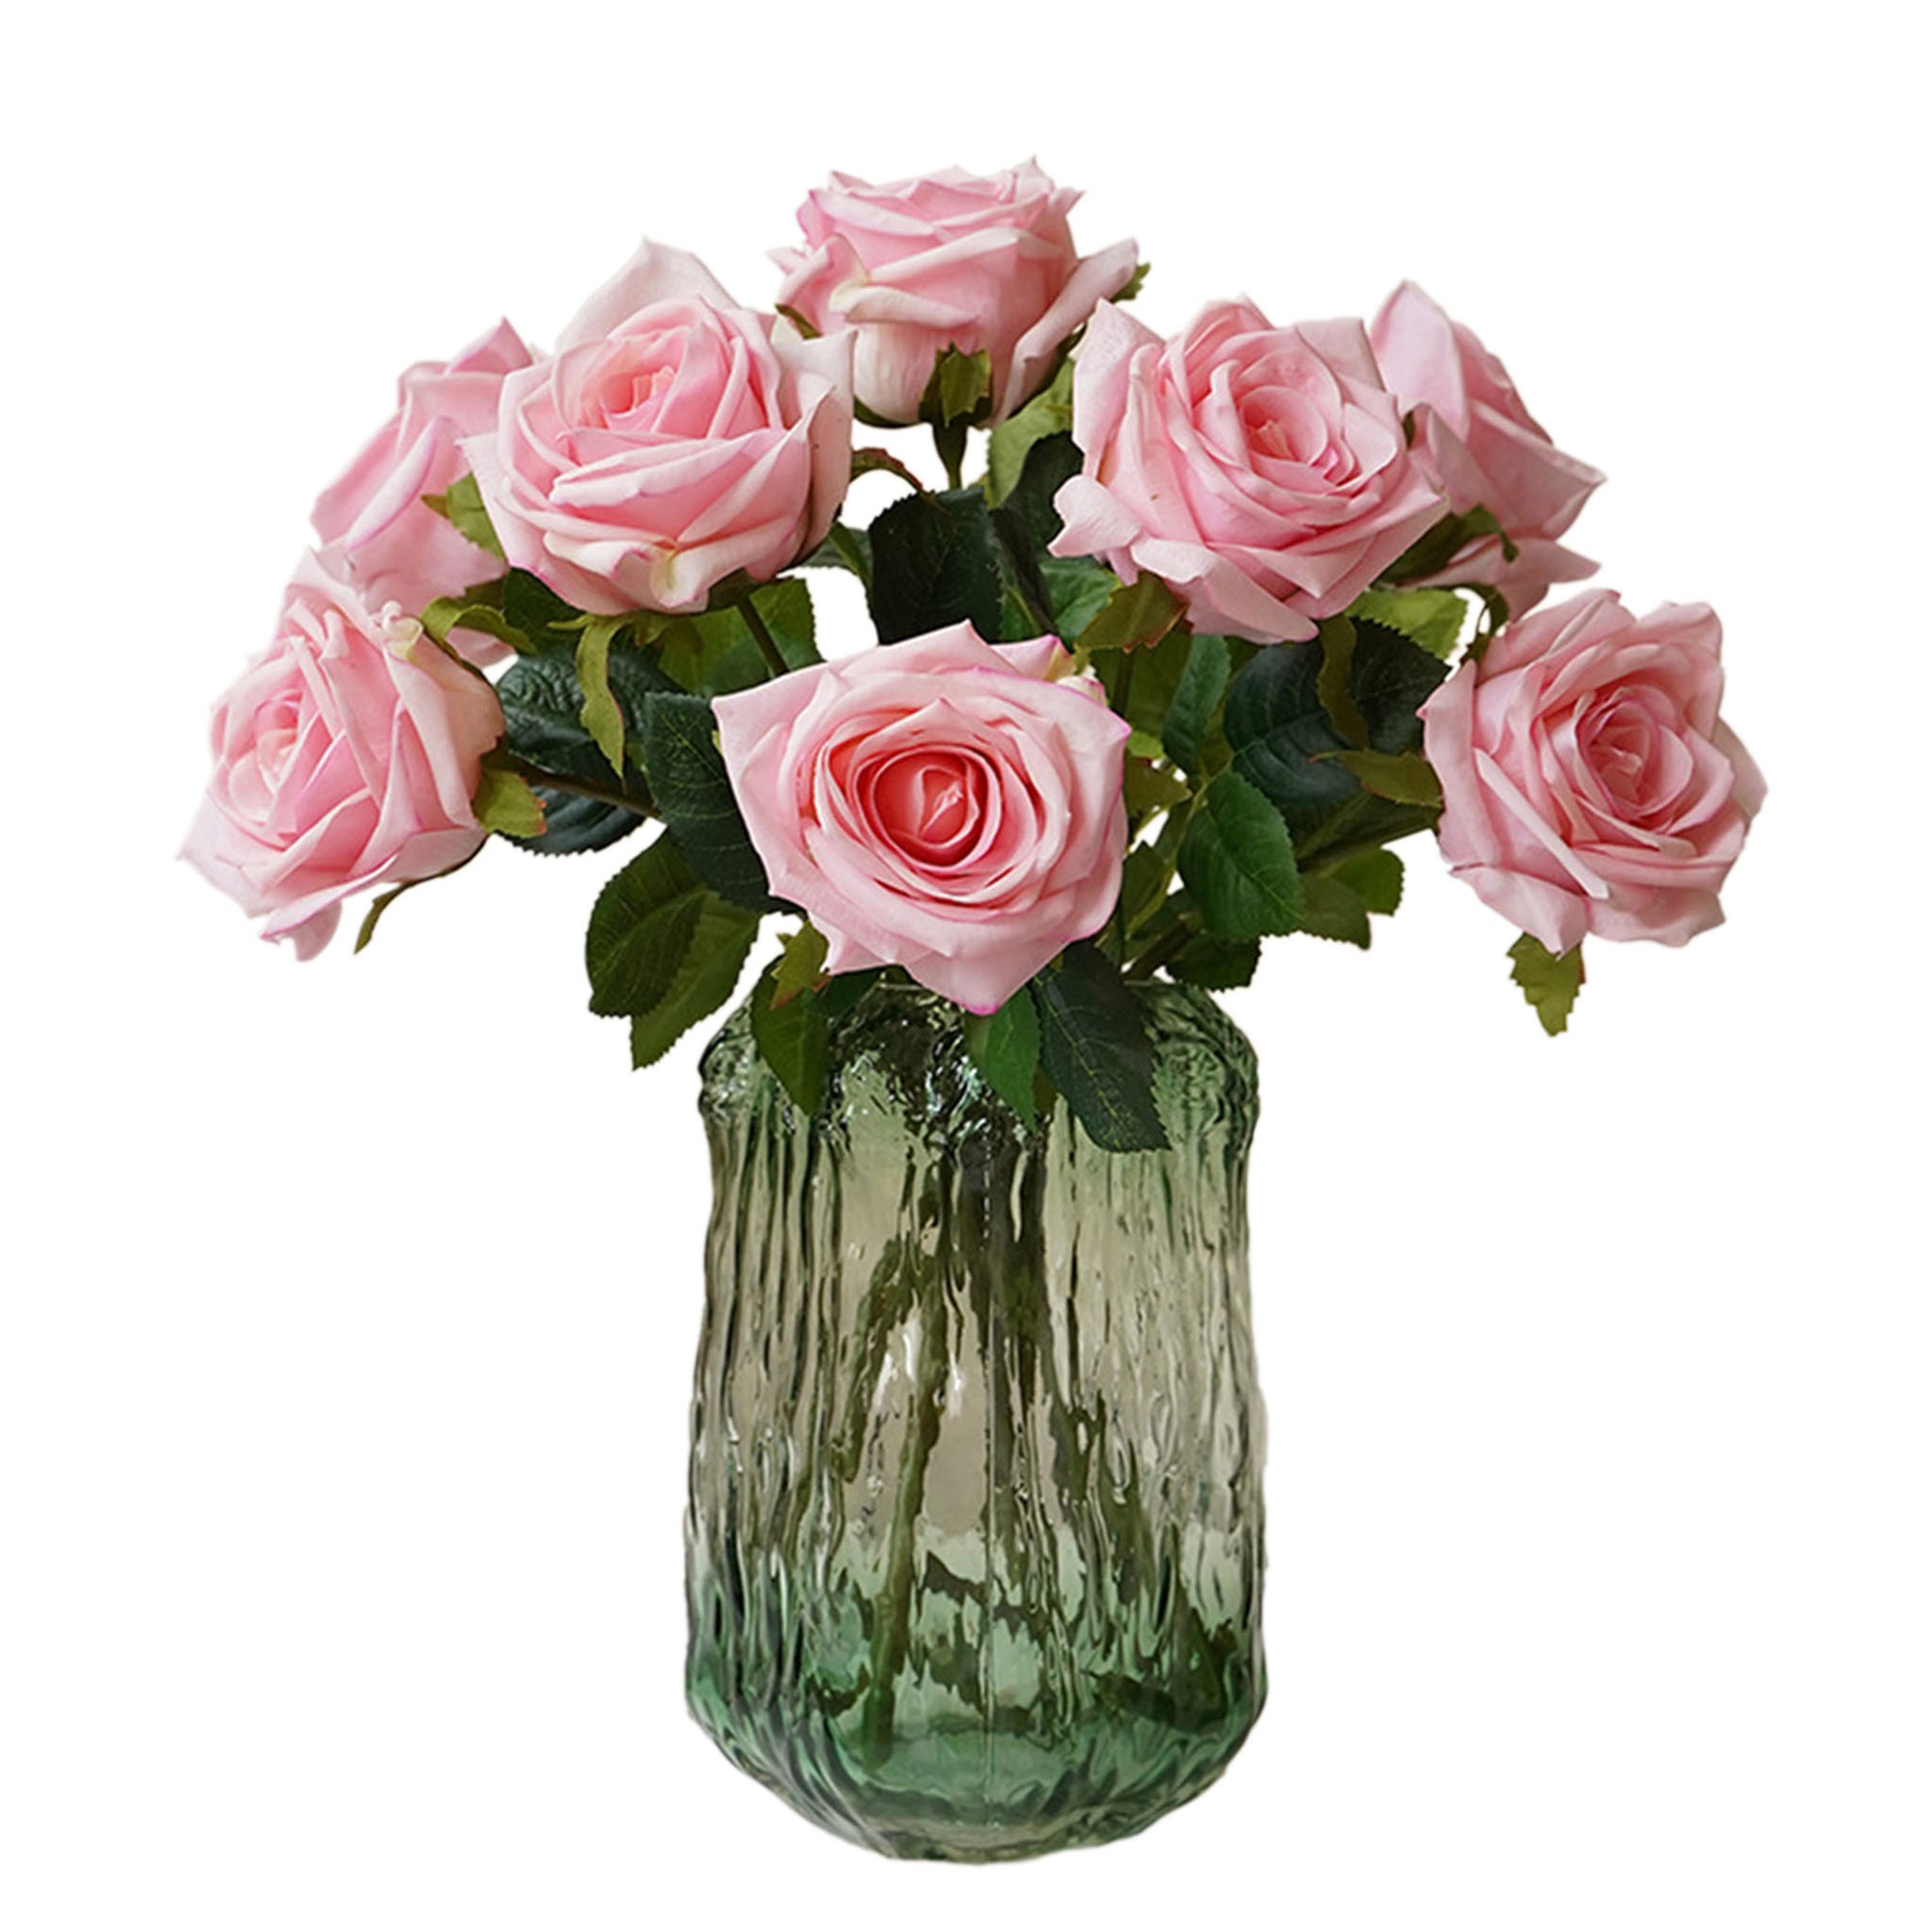 Realisic Faux Flowers Natural Touch Roses